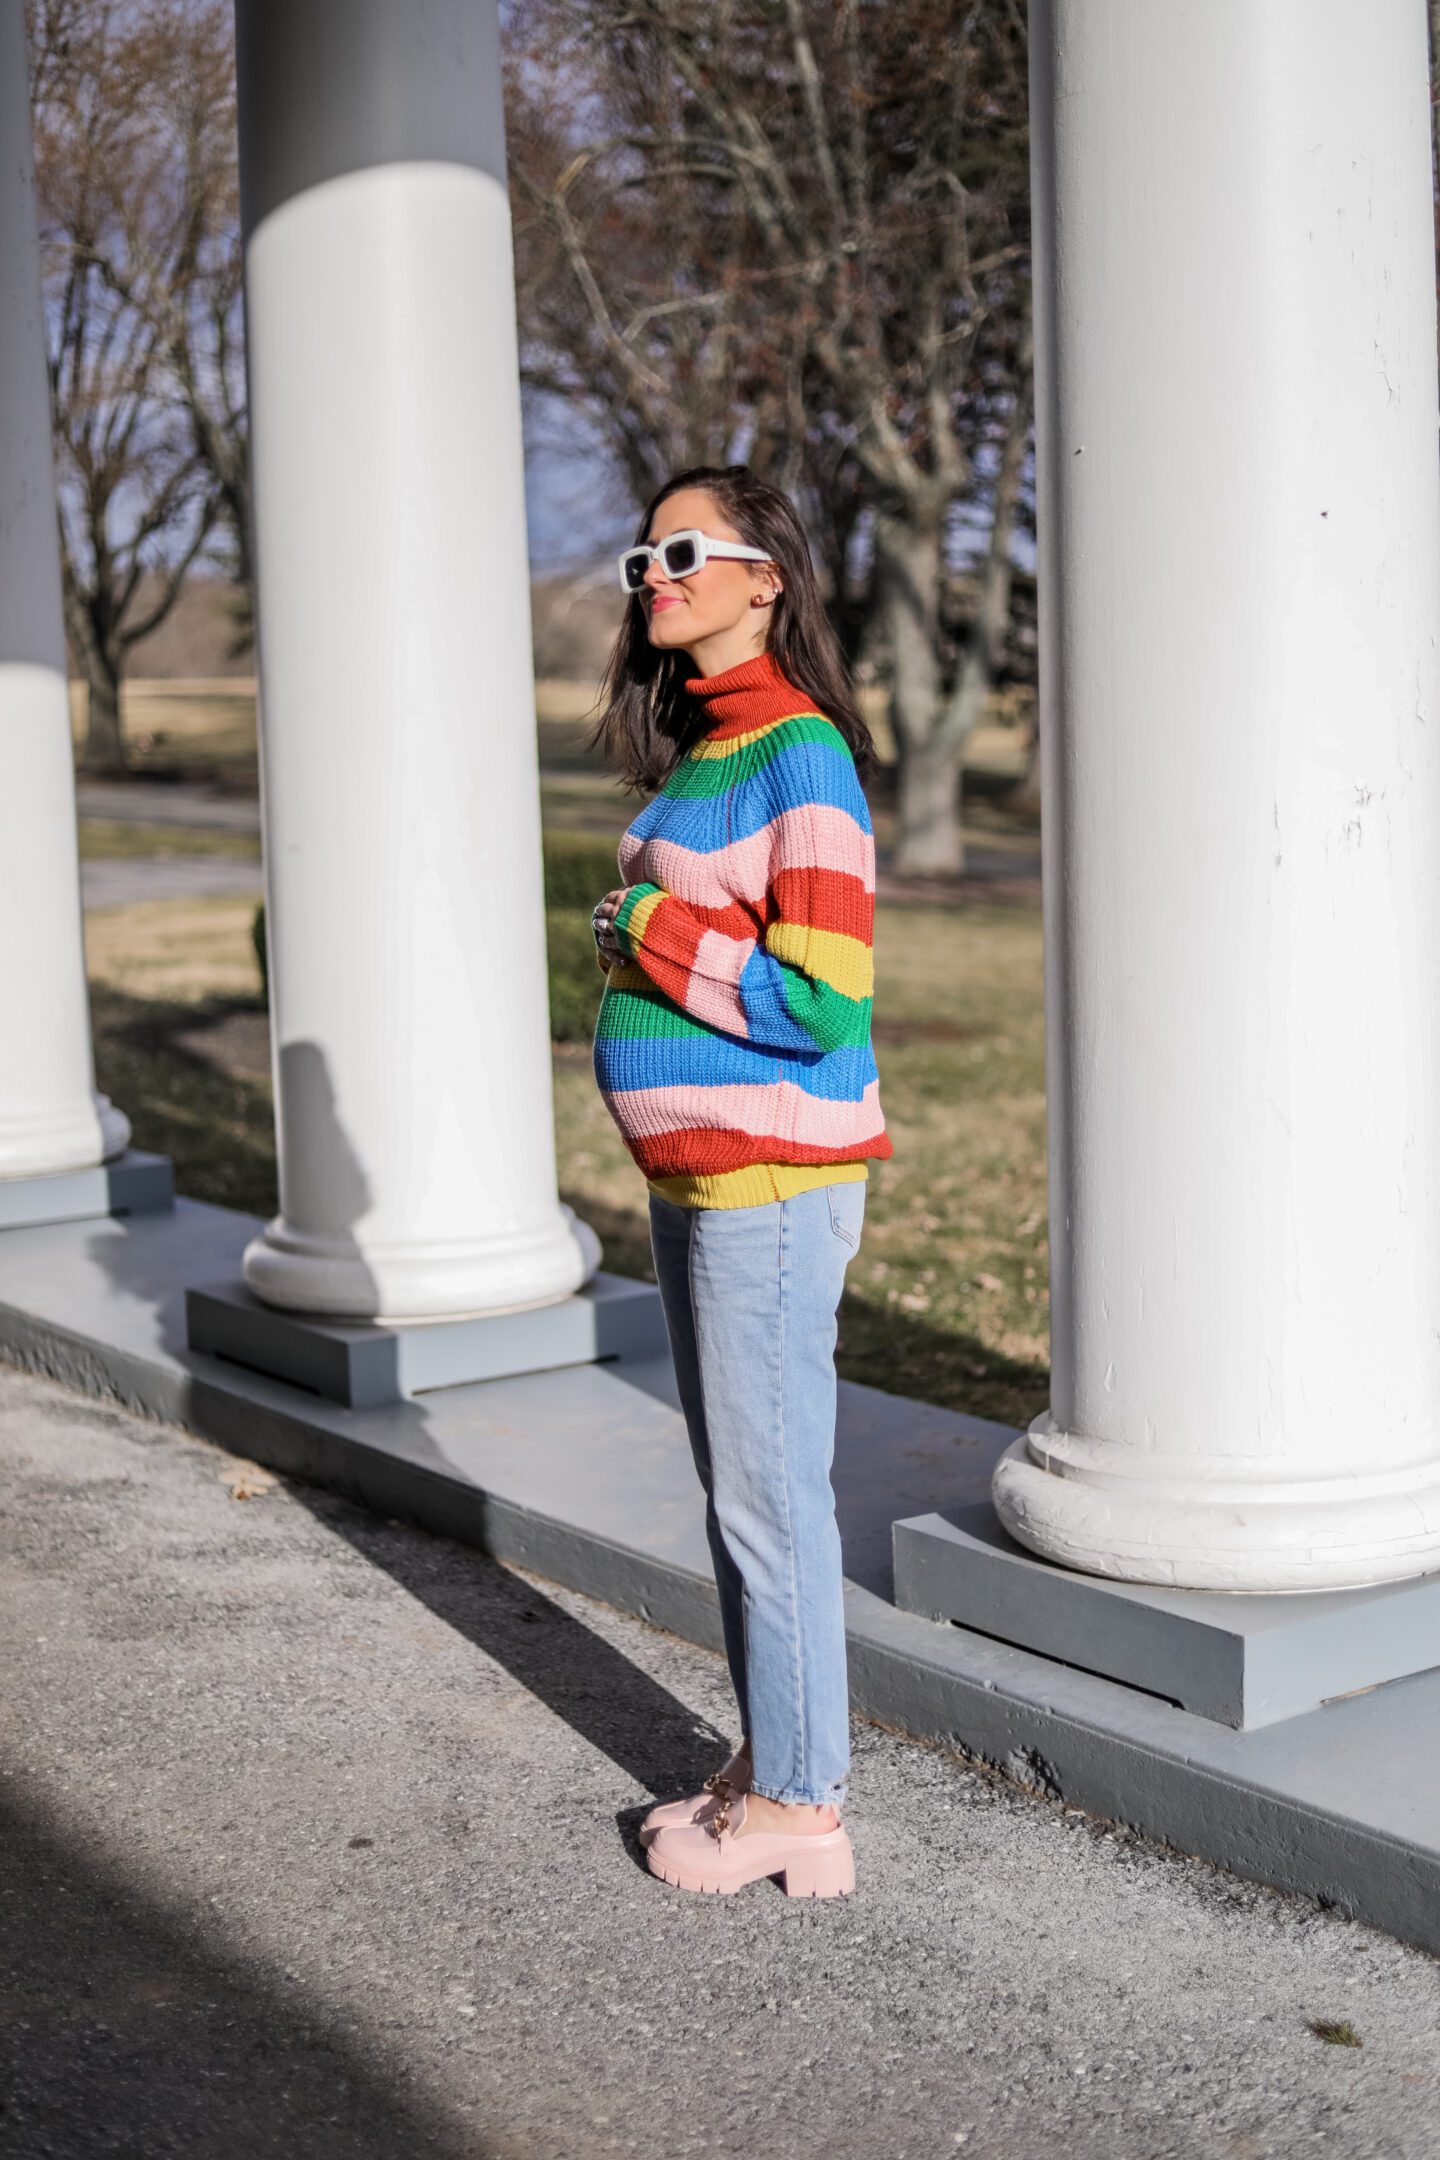 Striped rainbow sweater under $50 - on Coming Up Roses